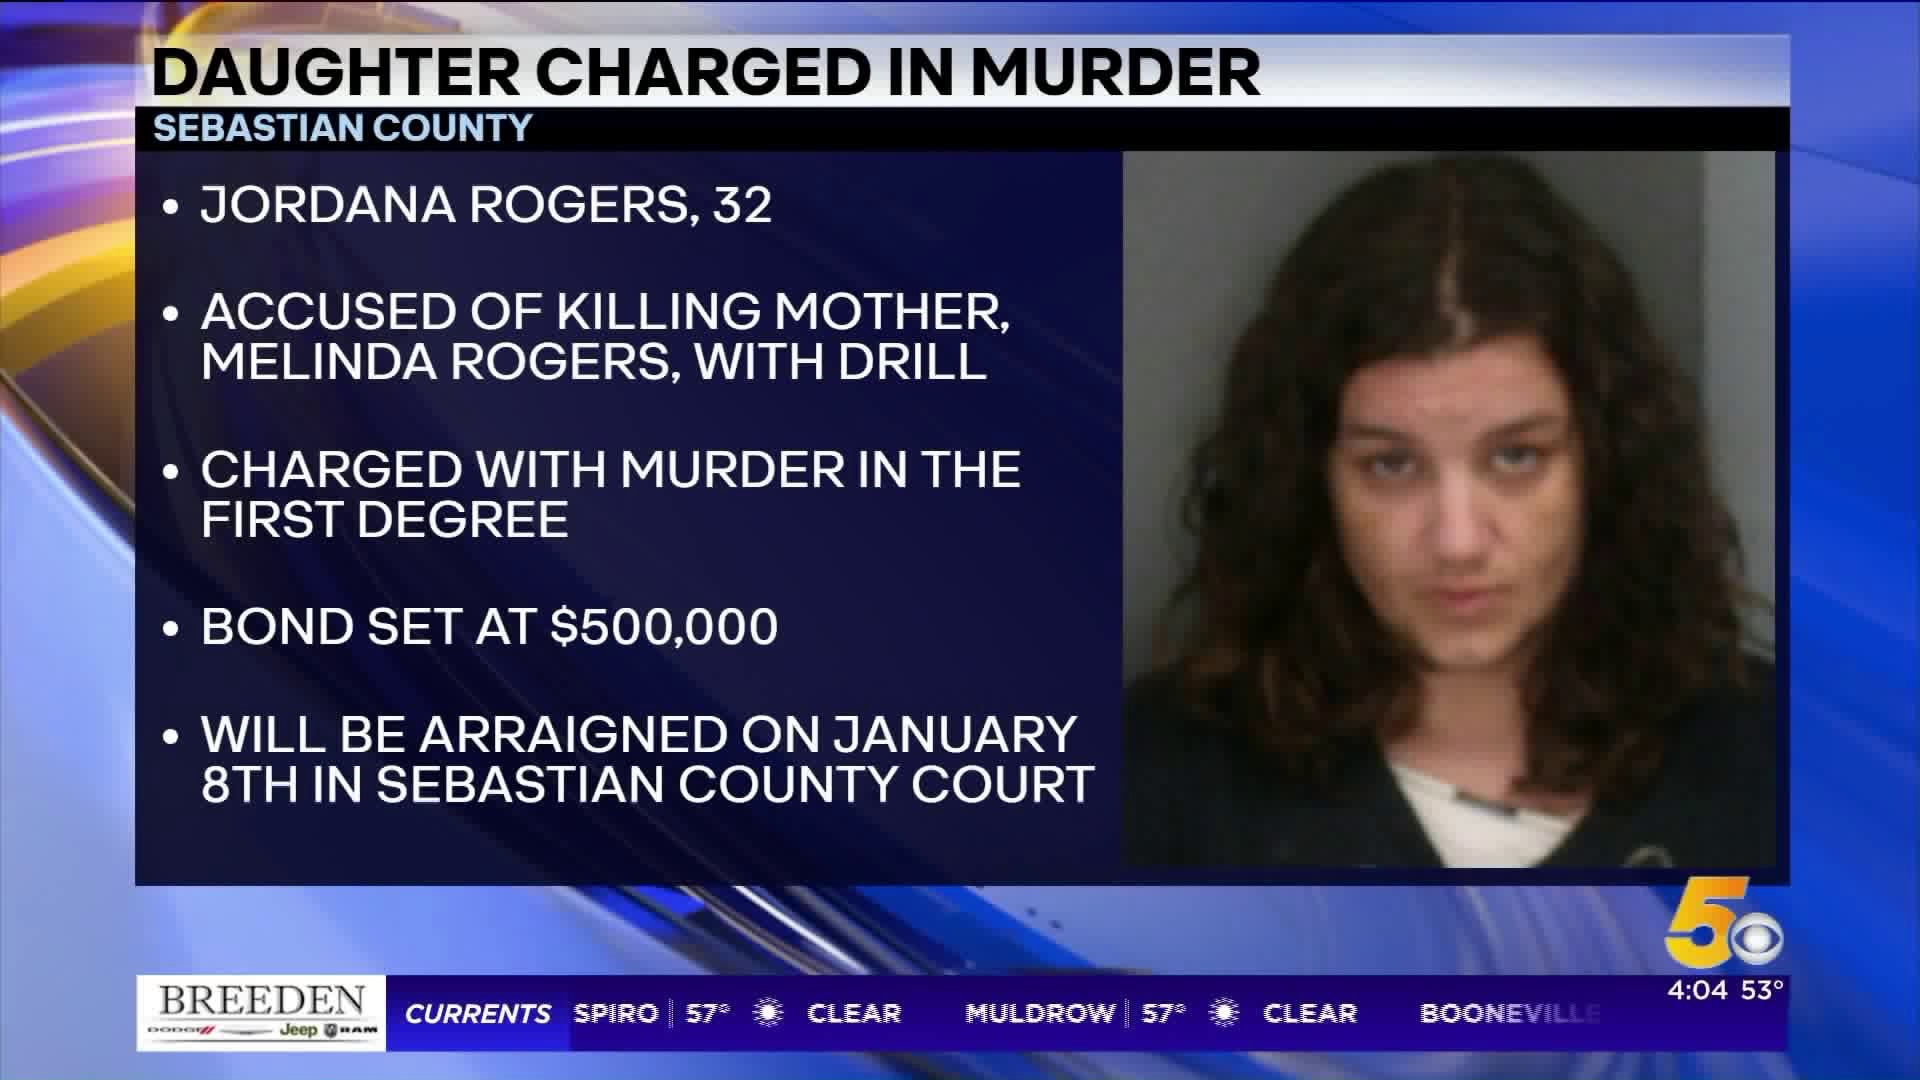 Mansfield Woman Charged With Murder For Killing Mother, New Details Revealed